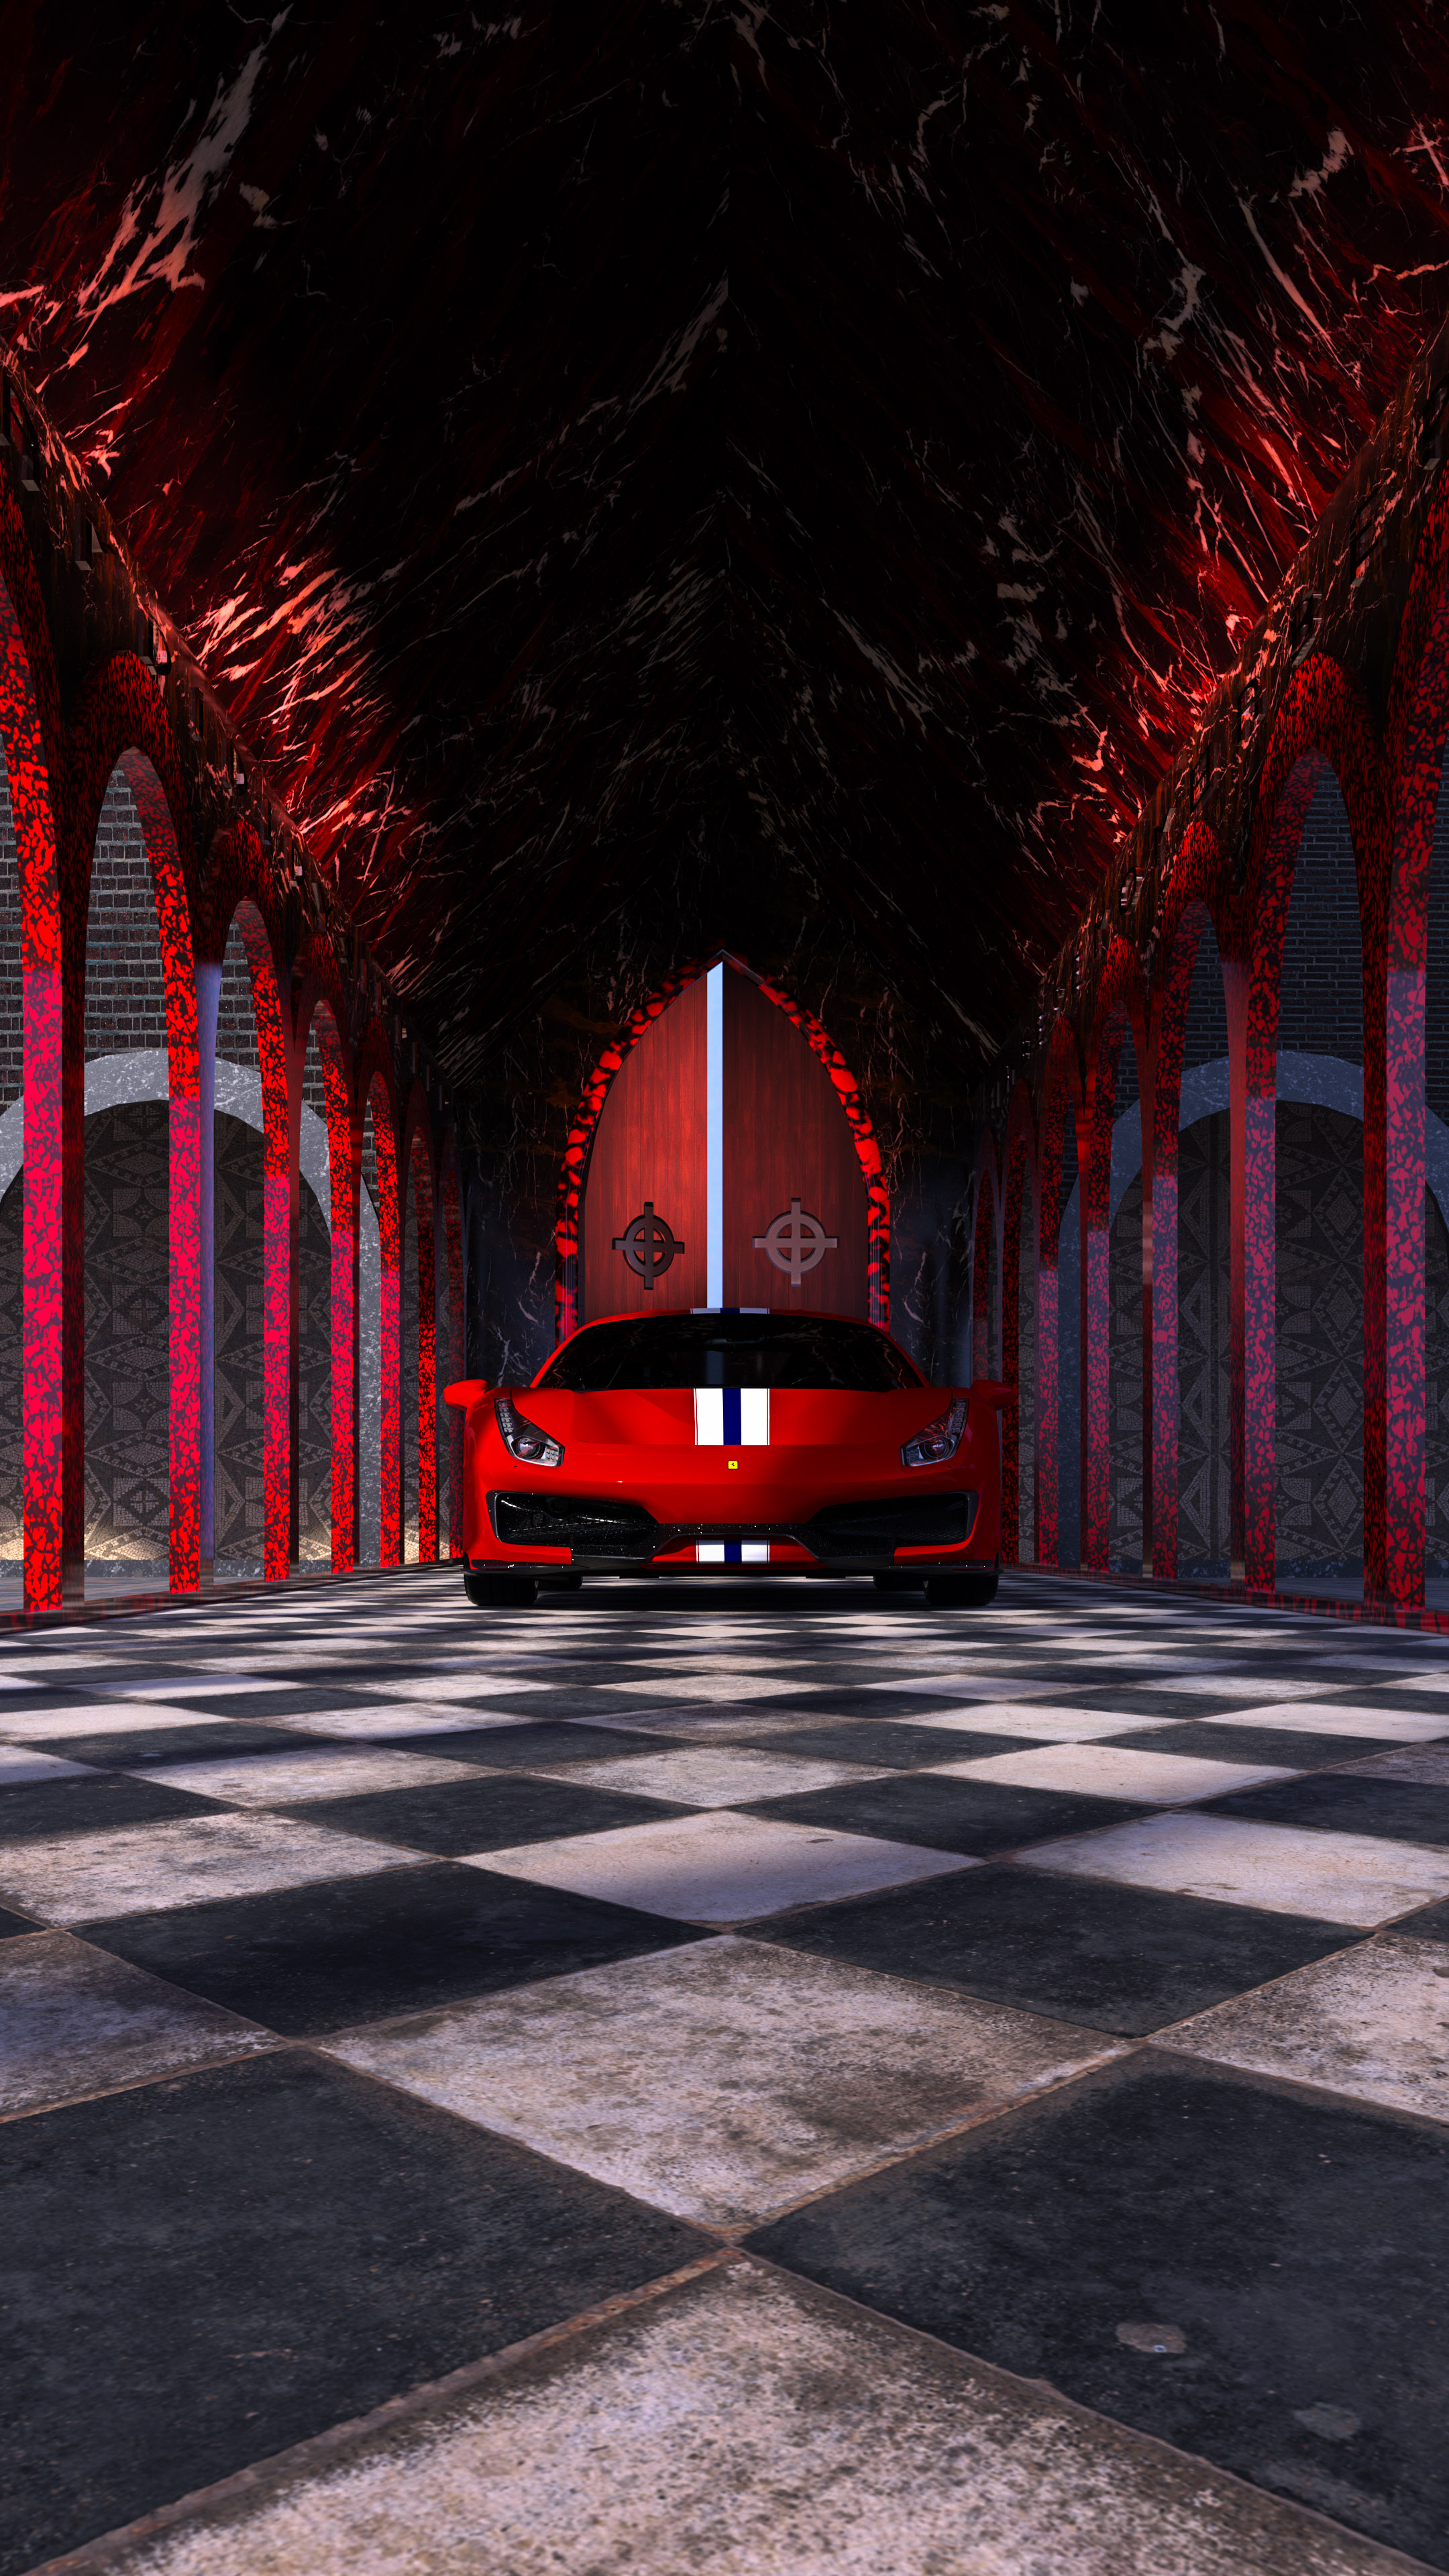 Experience the speed and power of a Ferrari 488 with our red car-themed iPhone wallpaper, designed to rev up your device’s aesthetics.